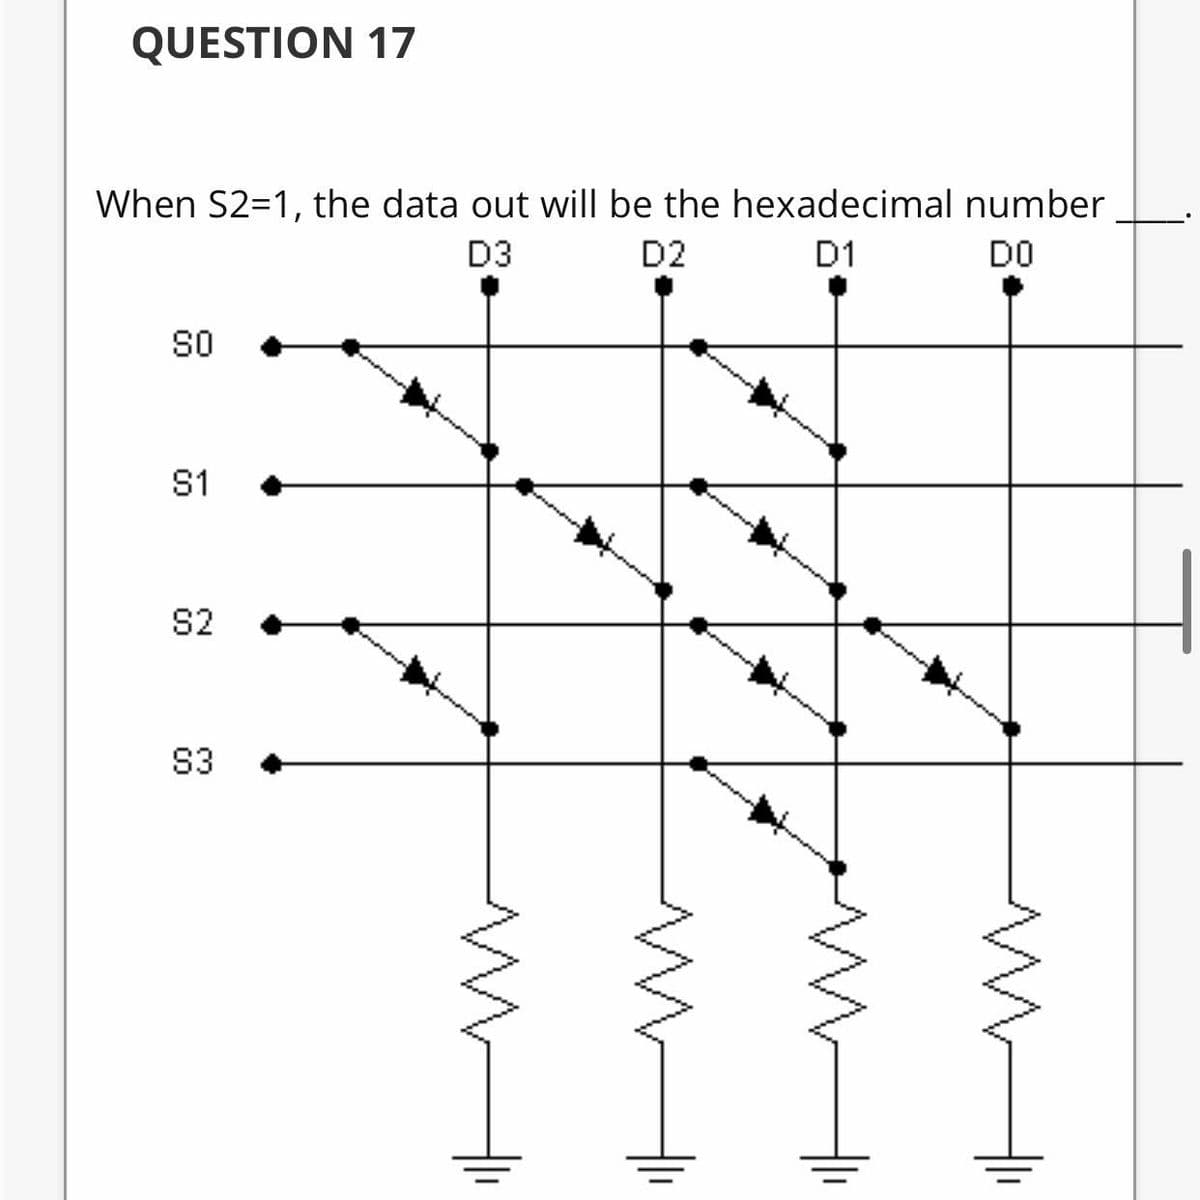 QUESTION 17
When S2=1, the data out will be the hexadecimal number
D3
D2
D1
DO
S1
S2
S3
투
두
